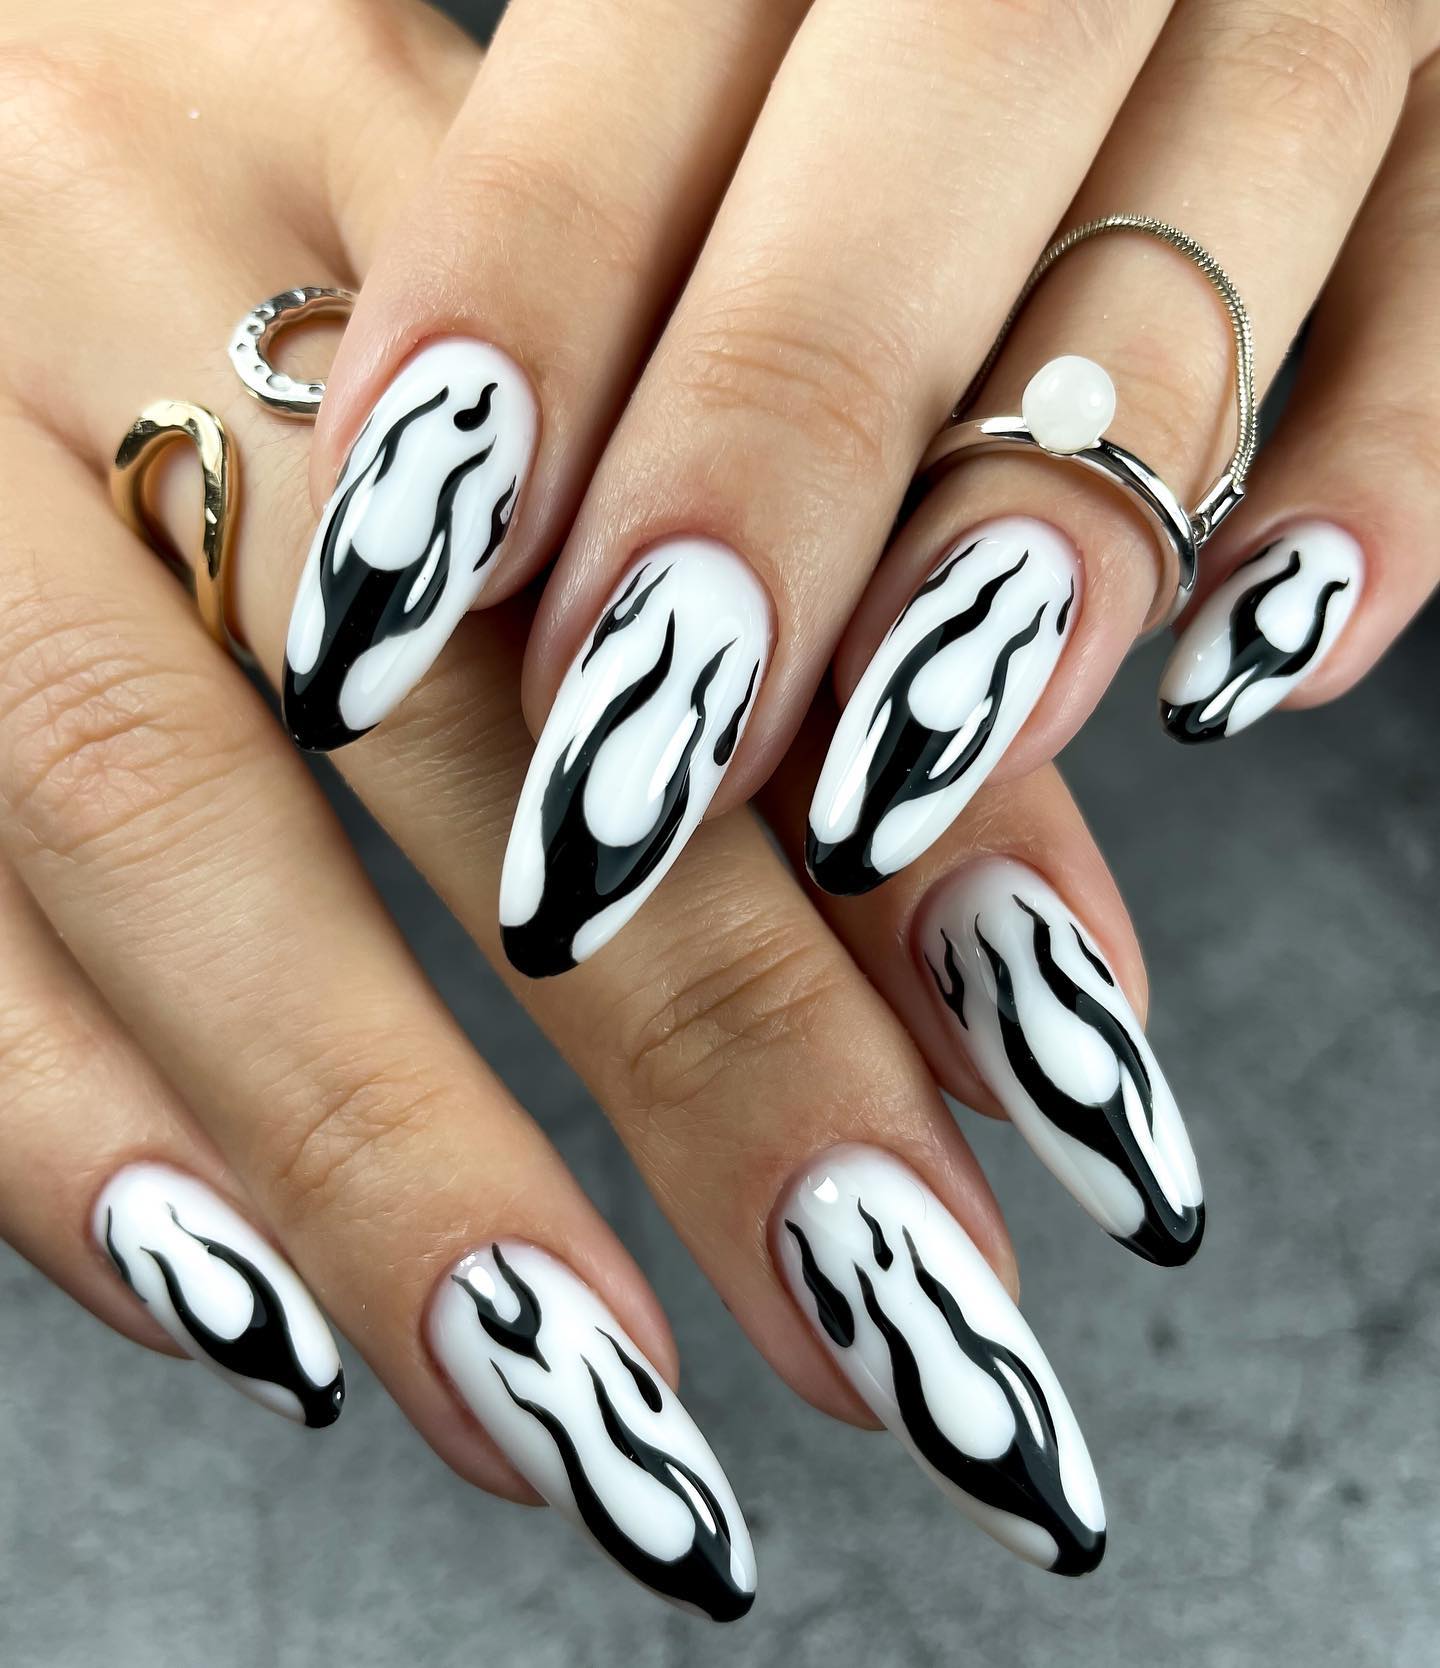 Black and white will never go out of style, so let's how the best color combo on your nails. On a white base, black flames will stand out. Let the black flames change your mood and feel like a star!